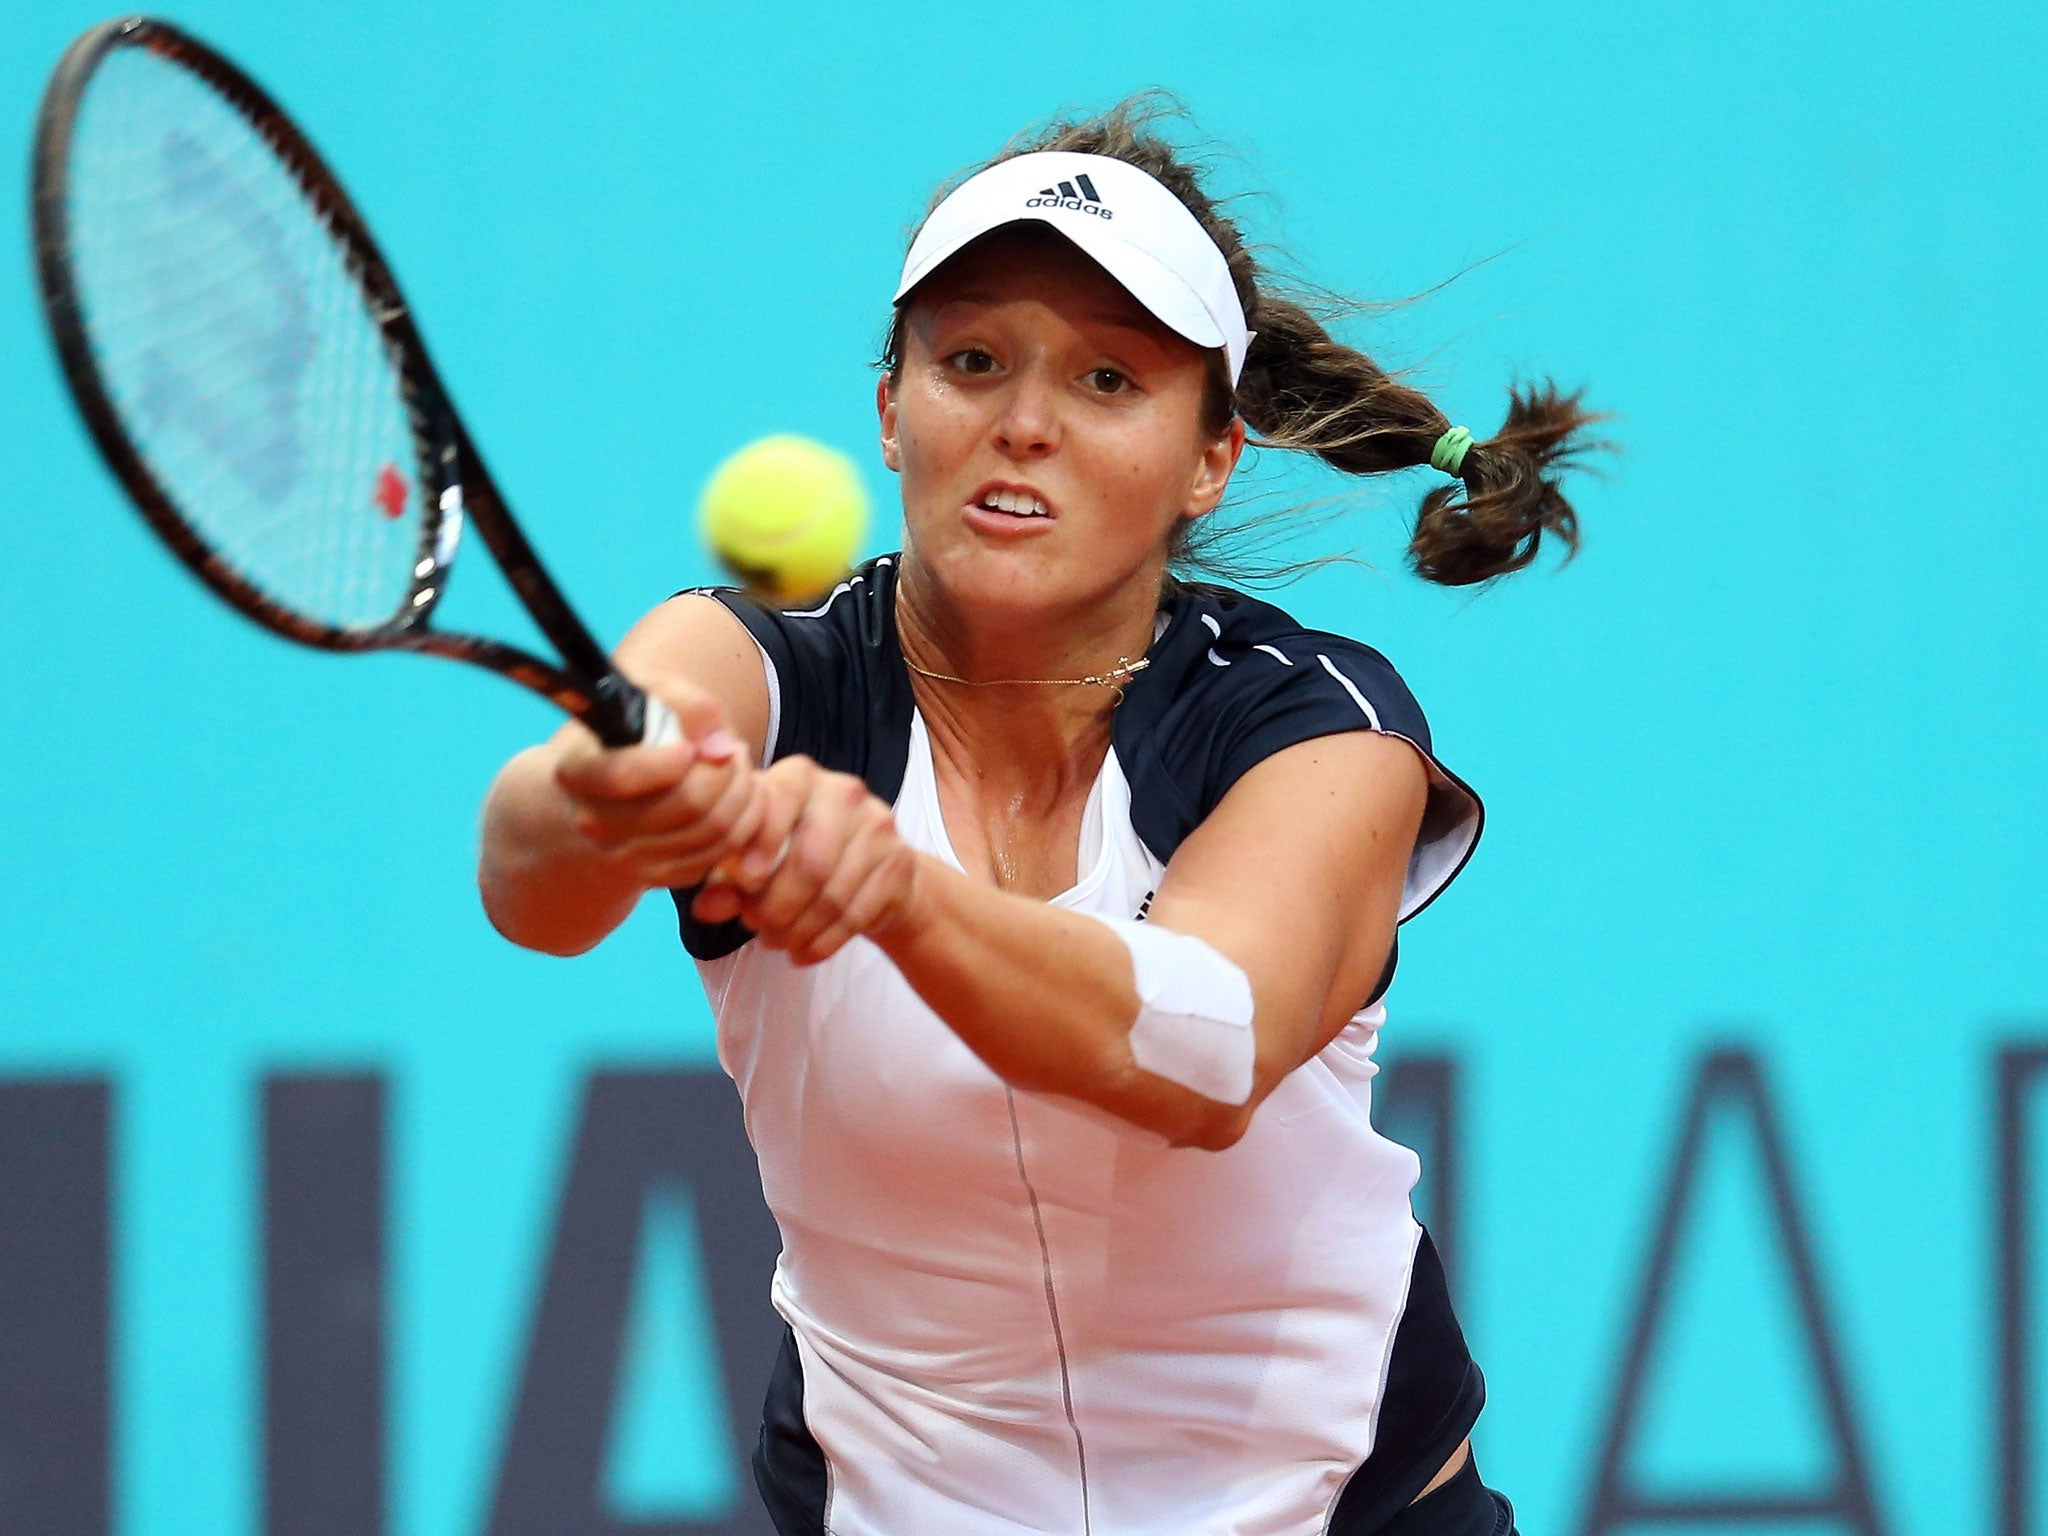 Laura Robson of Great Britain plays a backhand in her match against Magdalena Rybarikova of Slovakia during the Mutua Madrid Open tennis tournament at the Caja Magica